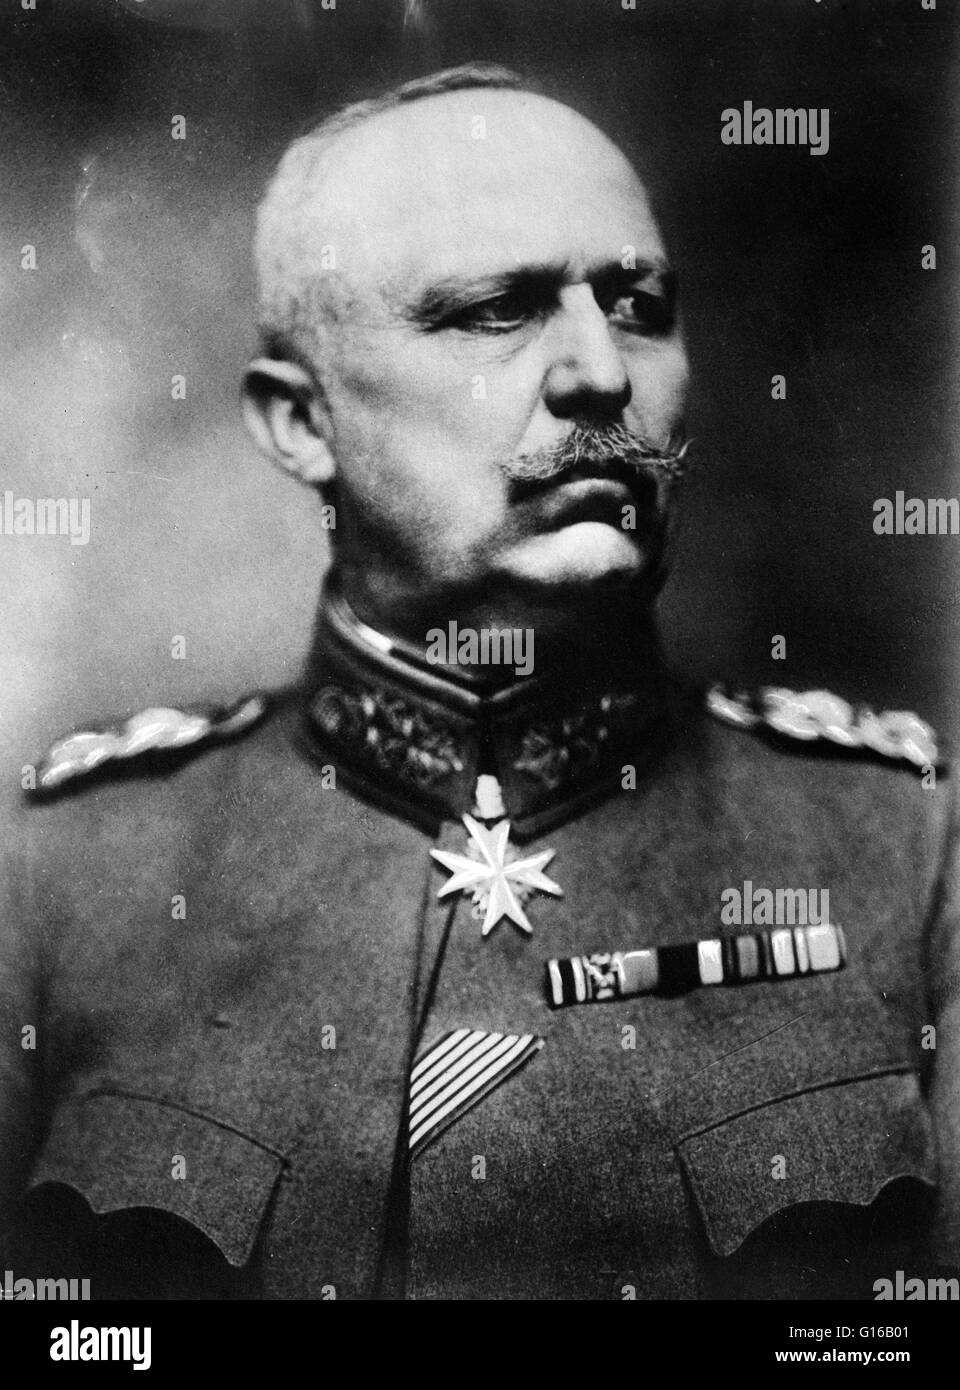 Erich Friedrich Wilhelm Ludendorff (April 9 1865 - December 20, 1937) was a German general. From August 1916 his appointment as Quartermaster general made him joint head (with Paul von Hindenburg), and chief engineer behind the management of Germany's eff Stock Photo